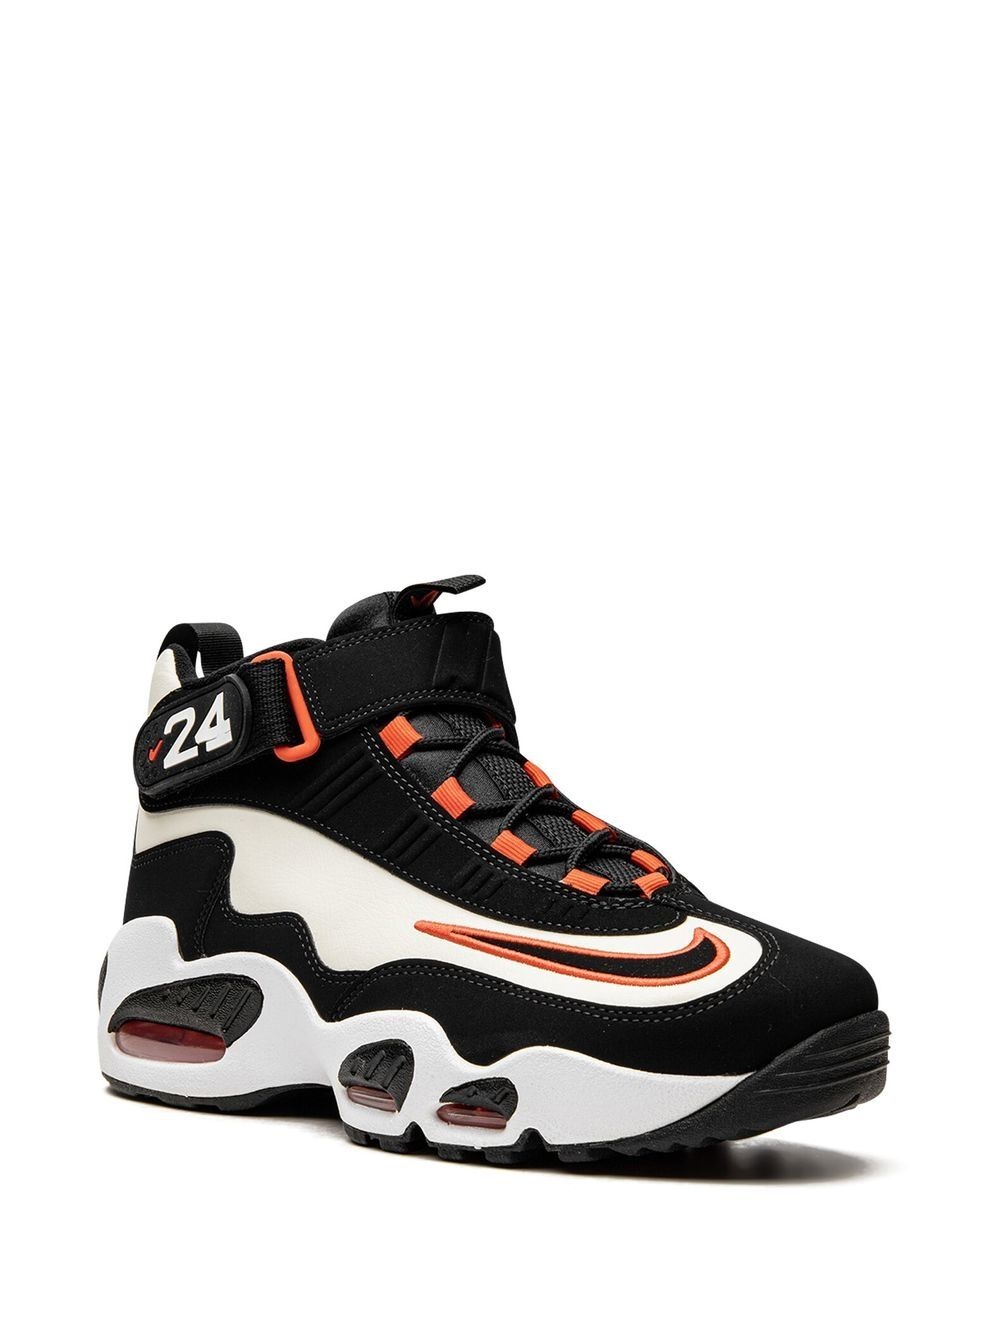 Air Griffey Max 1 "San Francisco Giants" sneakers - 2